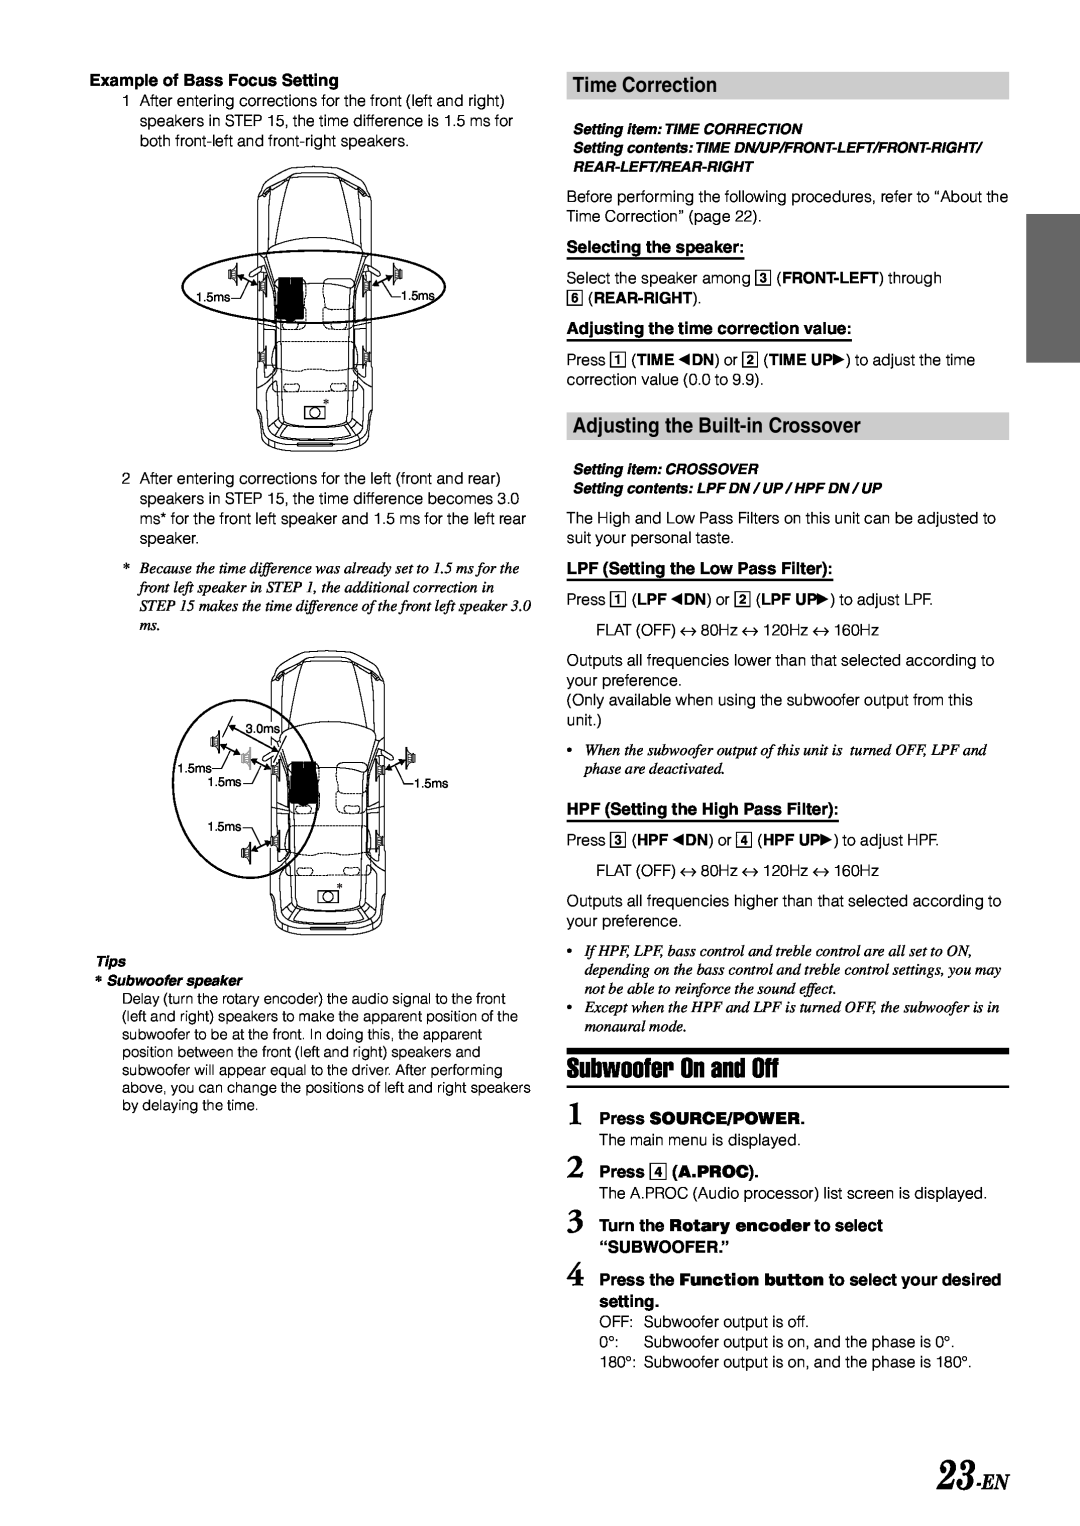 Alpine IVA-D900 owner manual Subwoofer On and Off, Time Correction, Adjusting the Built-inCrossover, 23-EN, 6REAR-RIGHT 